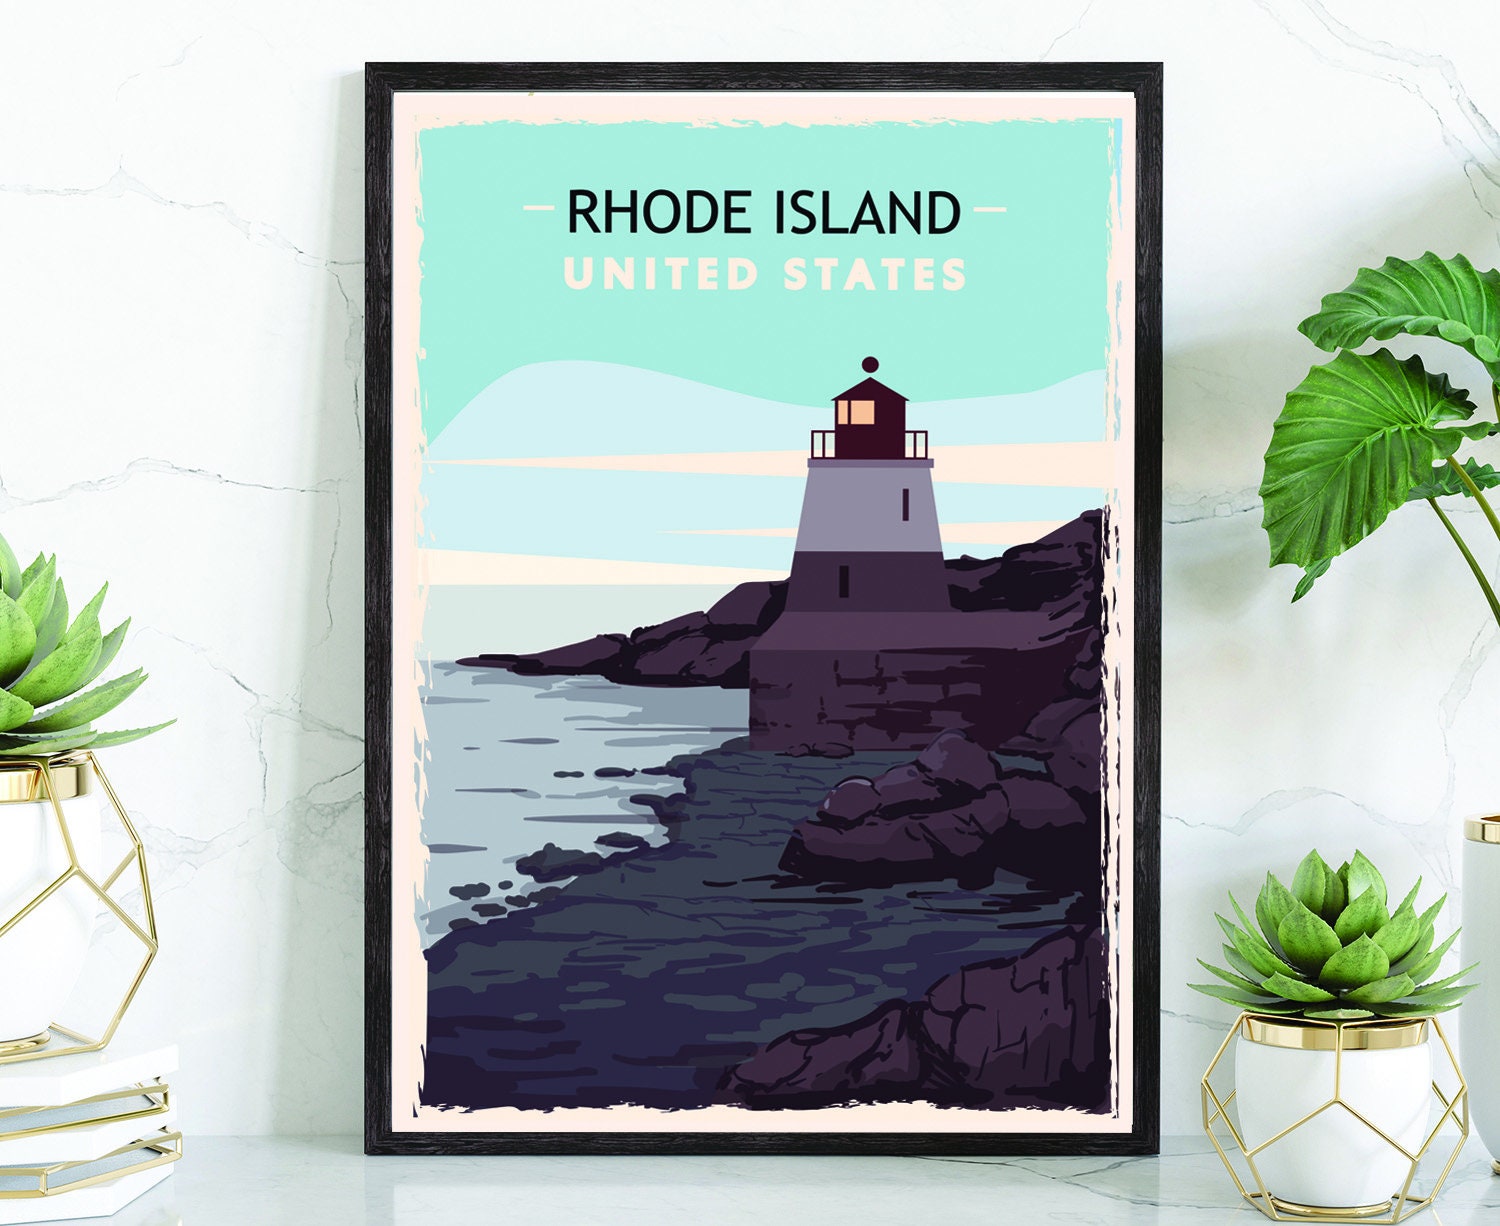 Retro Style Travel Poster, Rhode Island Vintage Rustic Poster Print, Home Wall Art, Office Wall Decor, Rhode Island, State Map Poster